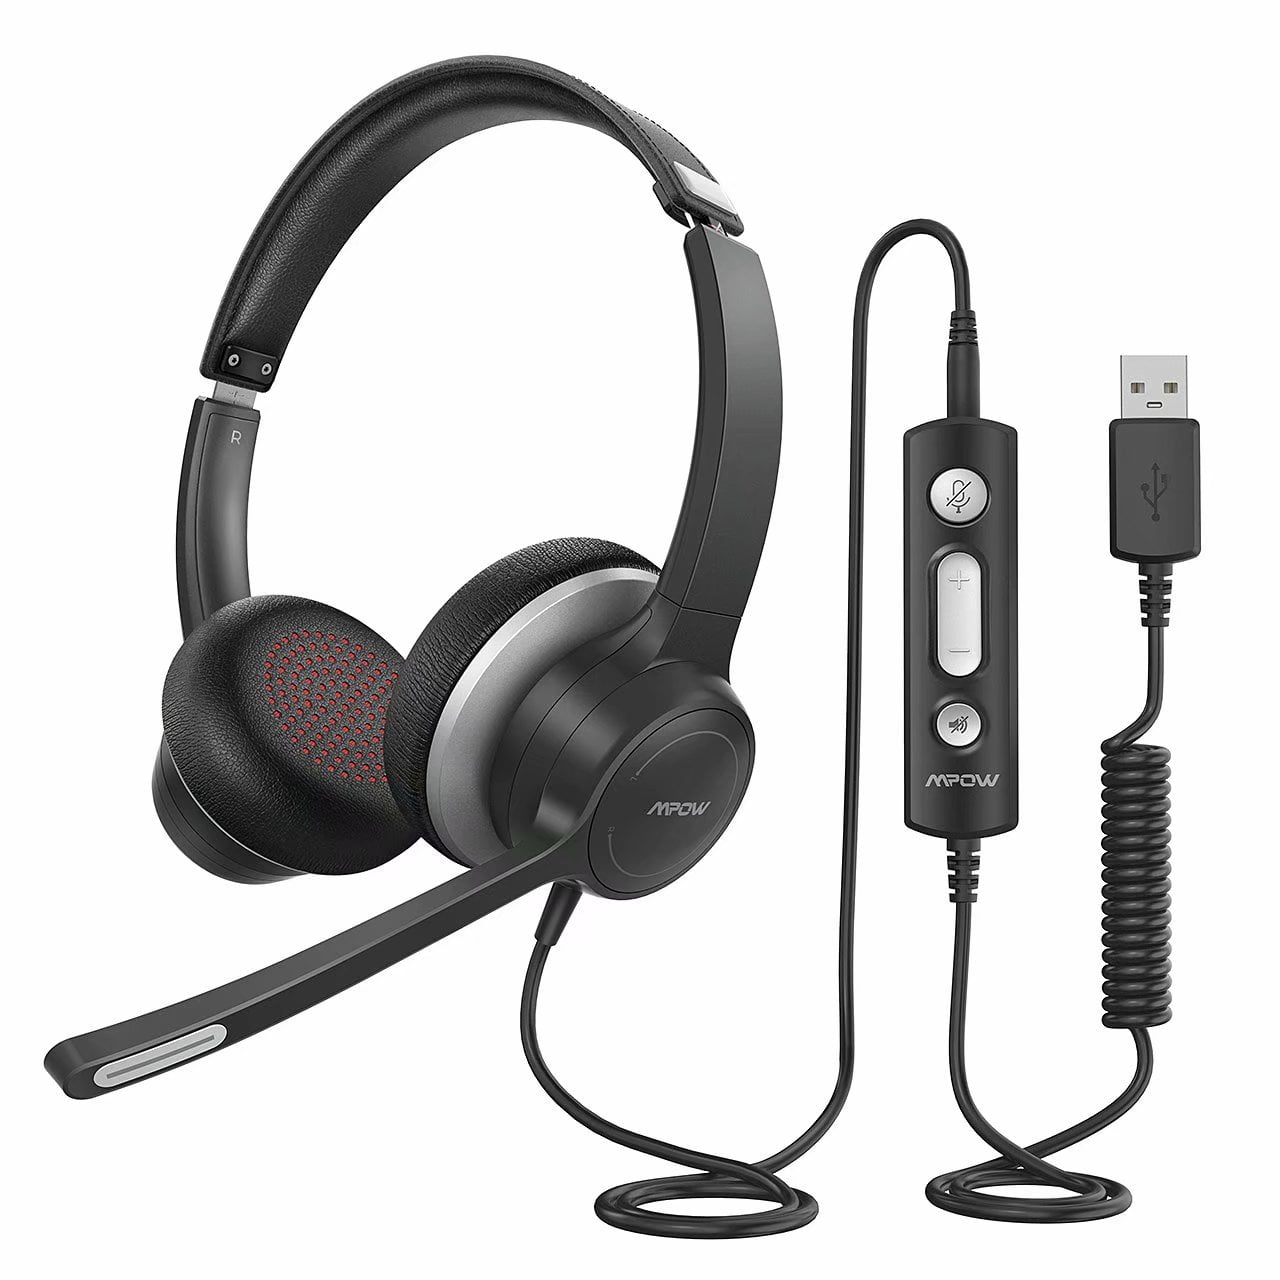 Comfort-fit Business Headset with Mic for Laptop Call Center Phone 3.5mm Computer Headset with in-Line Call Control Skype Chat PC USB Headset with Microphone Noise Cancelling